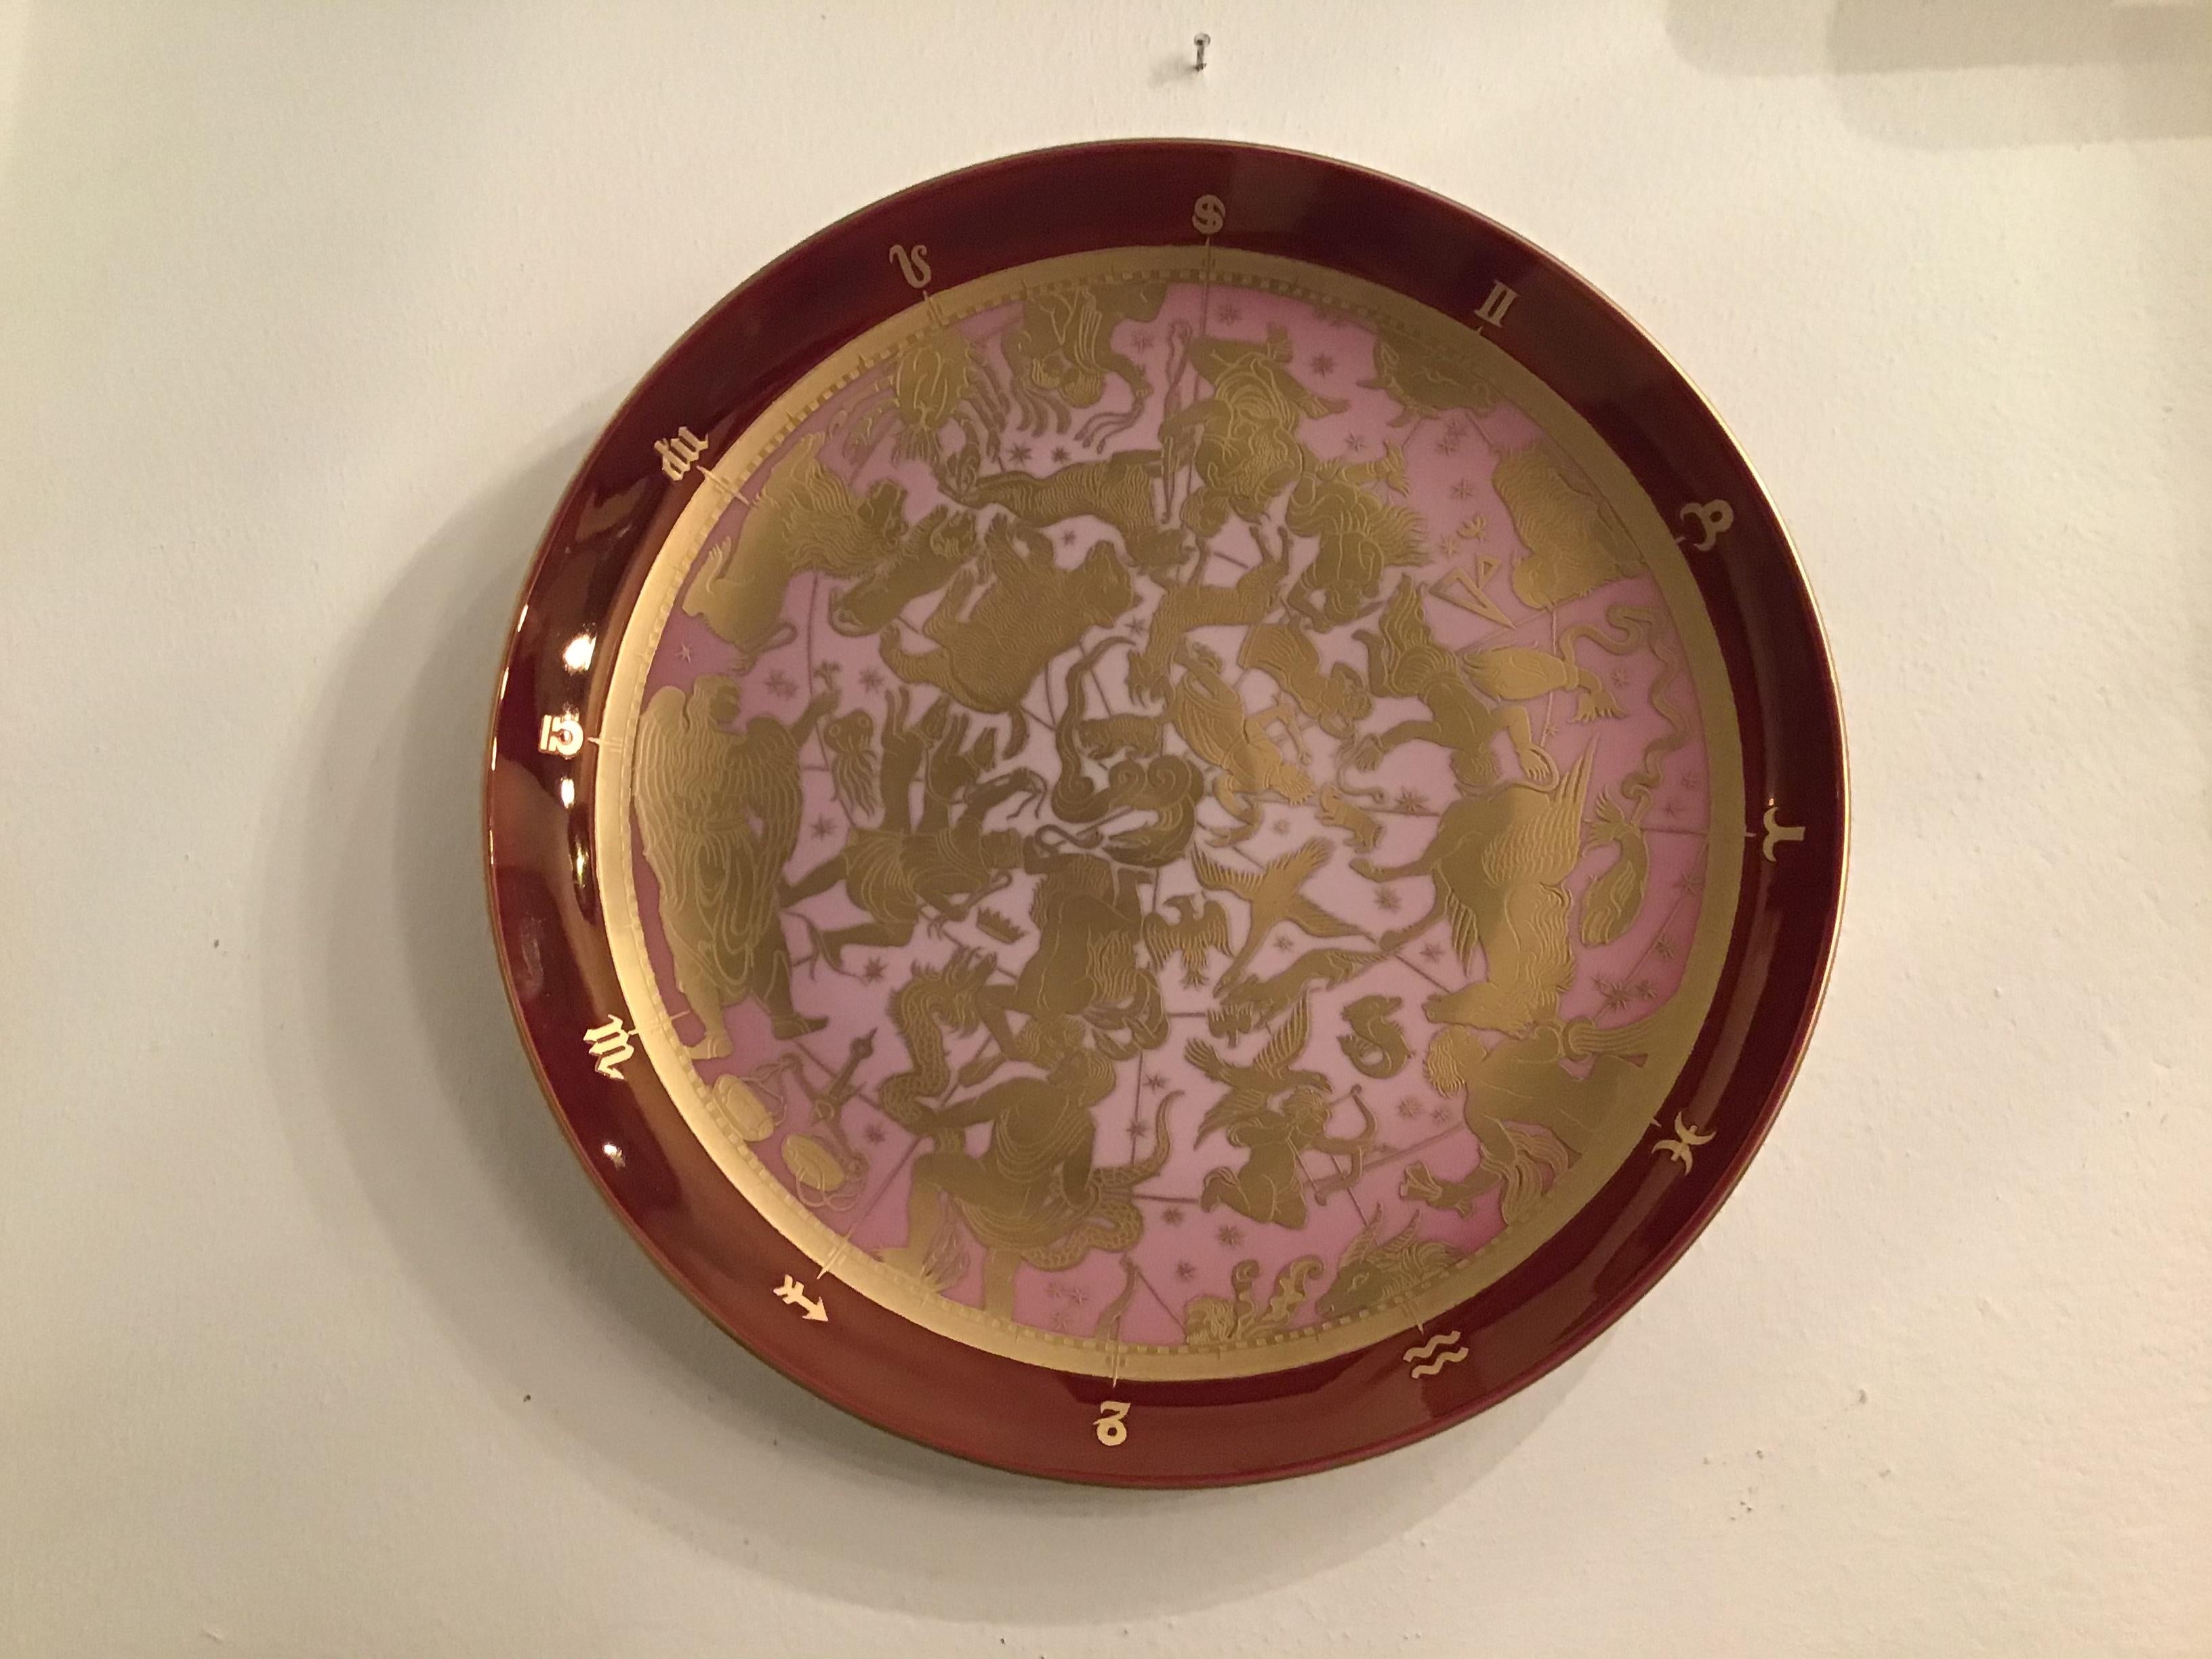 Italian Morbelli Porcelain Wall Plate “Planisfero Celeste” Worked with Pure Gold 1960 It For Sale